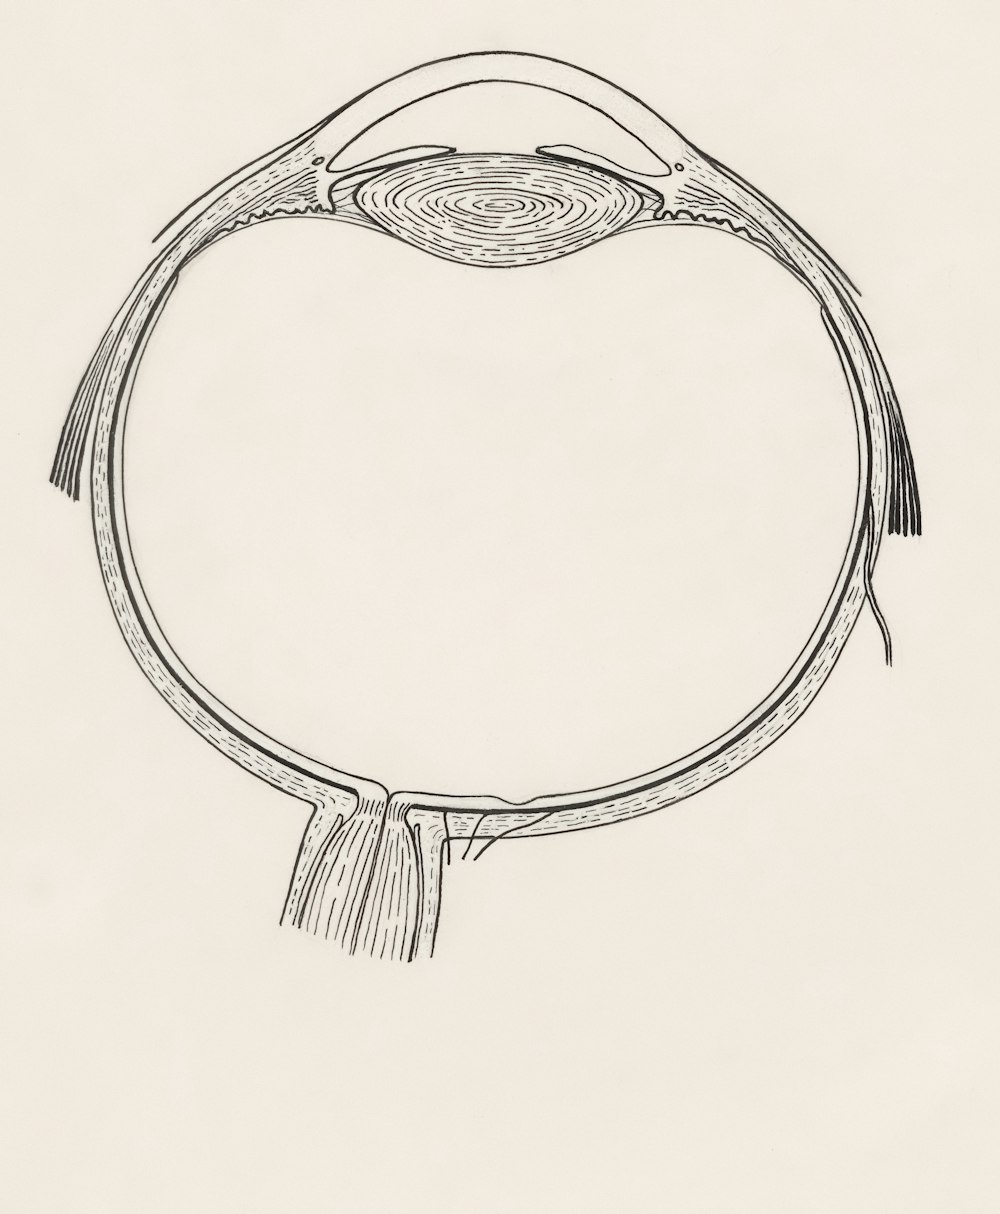 a drawing of a circular object with a tassel